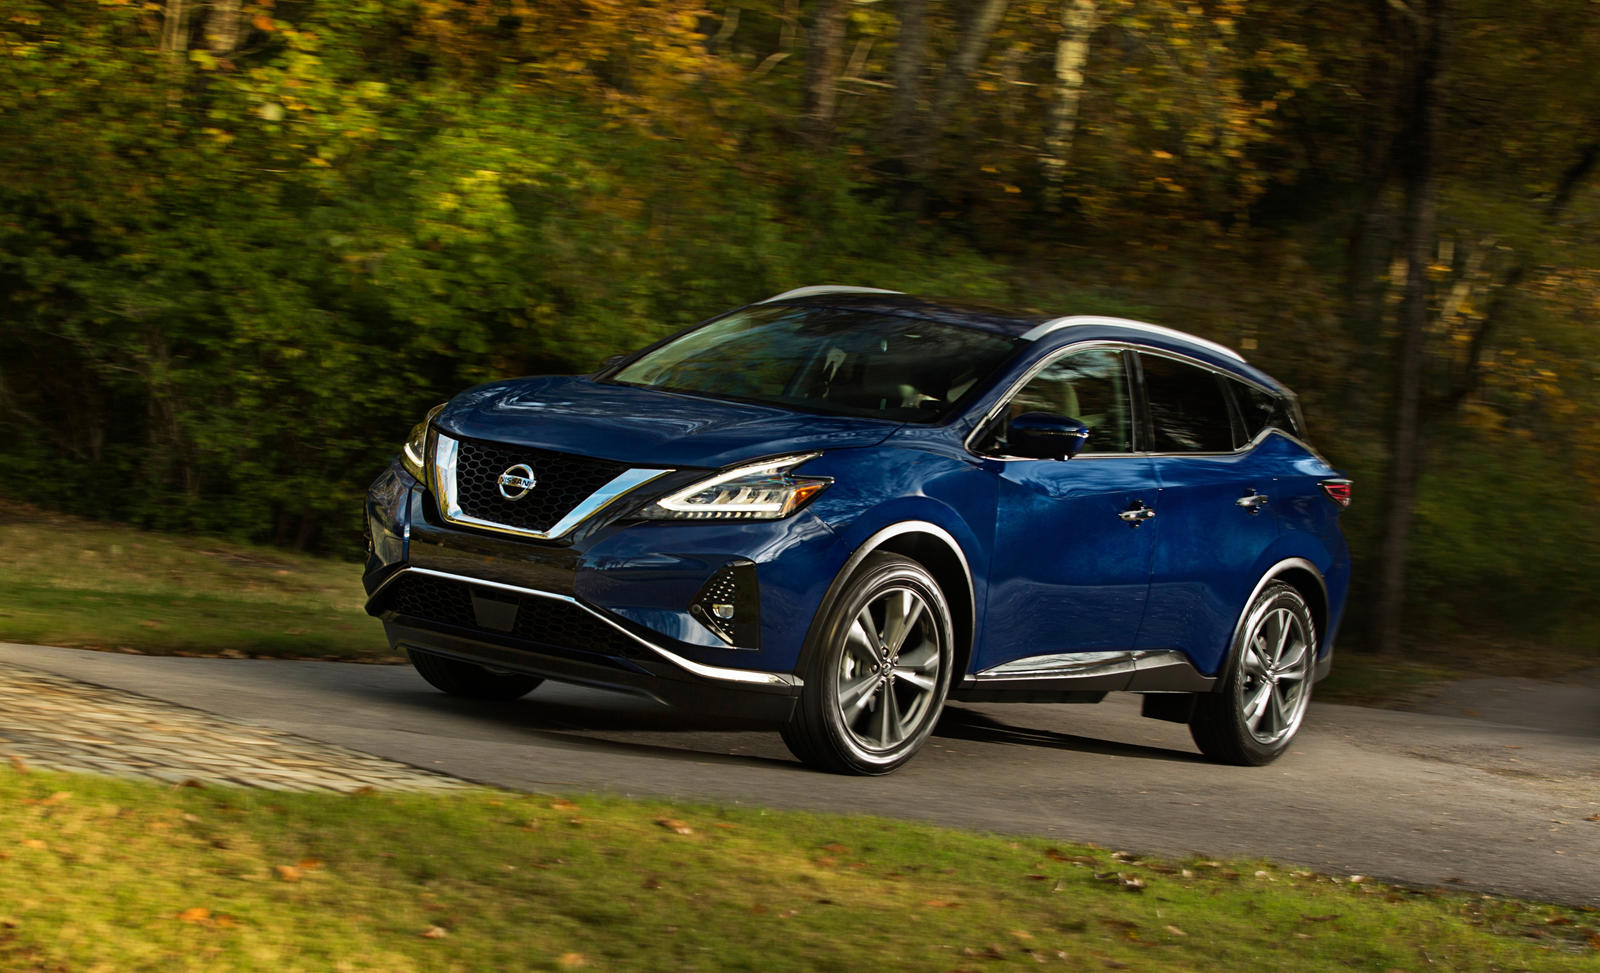 2019 Nissan Murano Arrives In LA With New Style And New Tech | CarBuzz